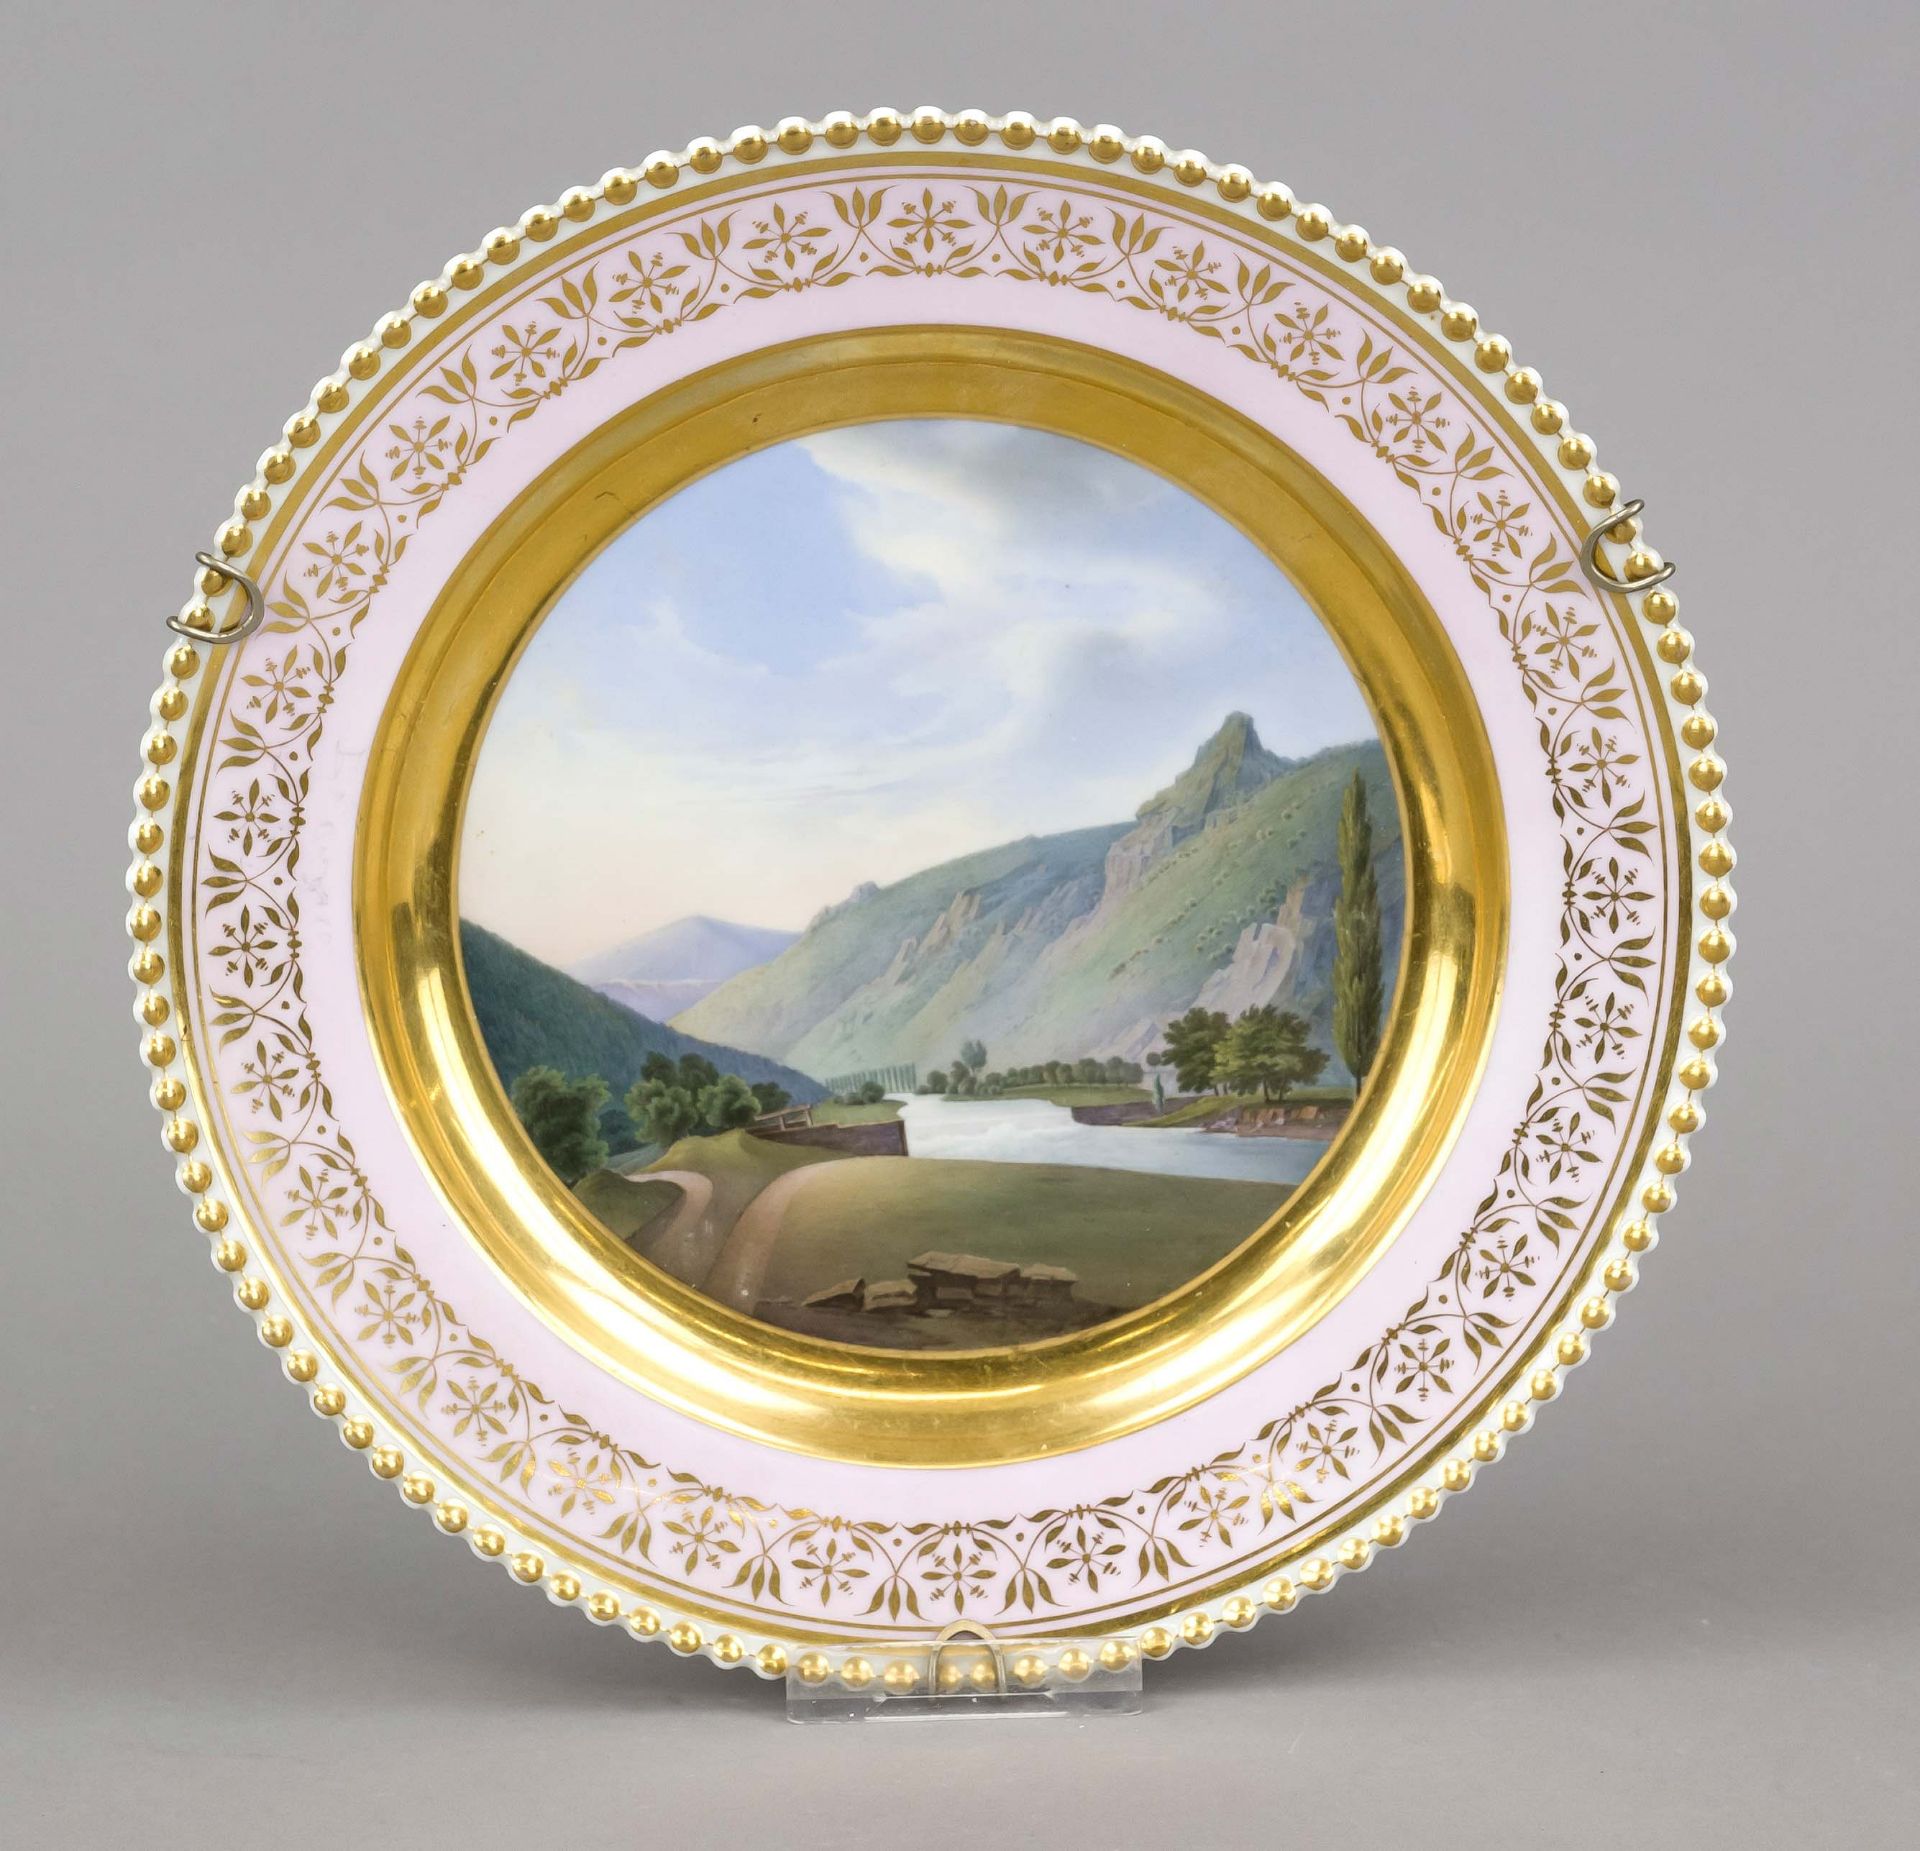 Topographical plate, KPM Berlin, 1830s, 1st choice, red imperial orb mark after 1832, antique smooth